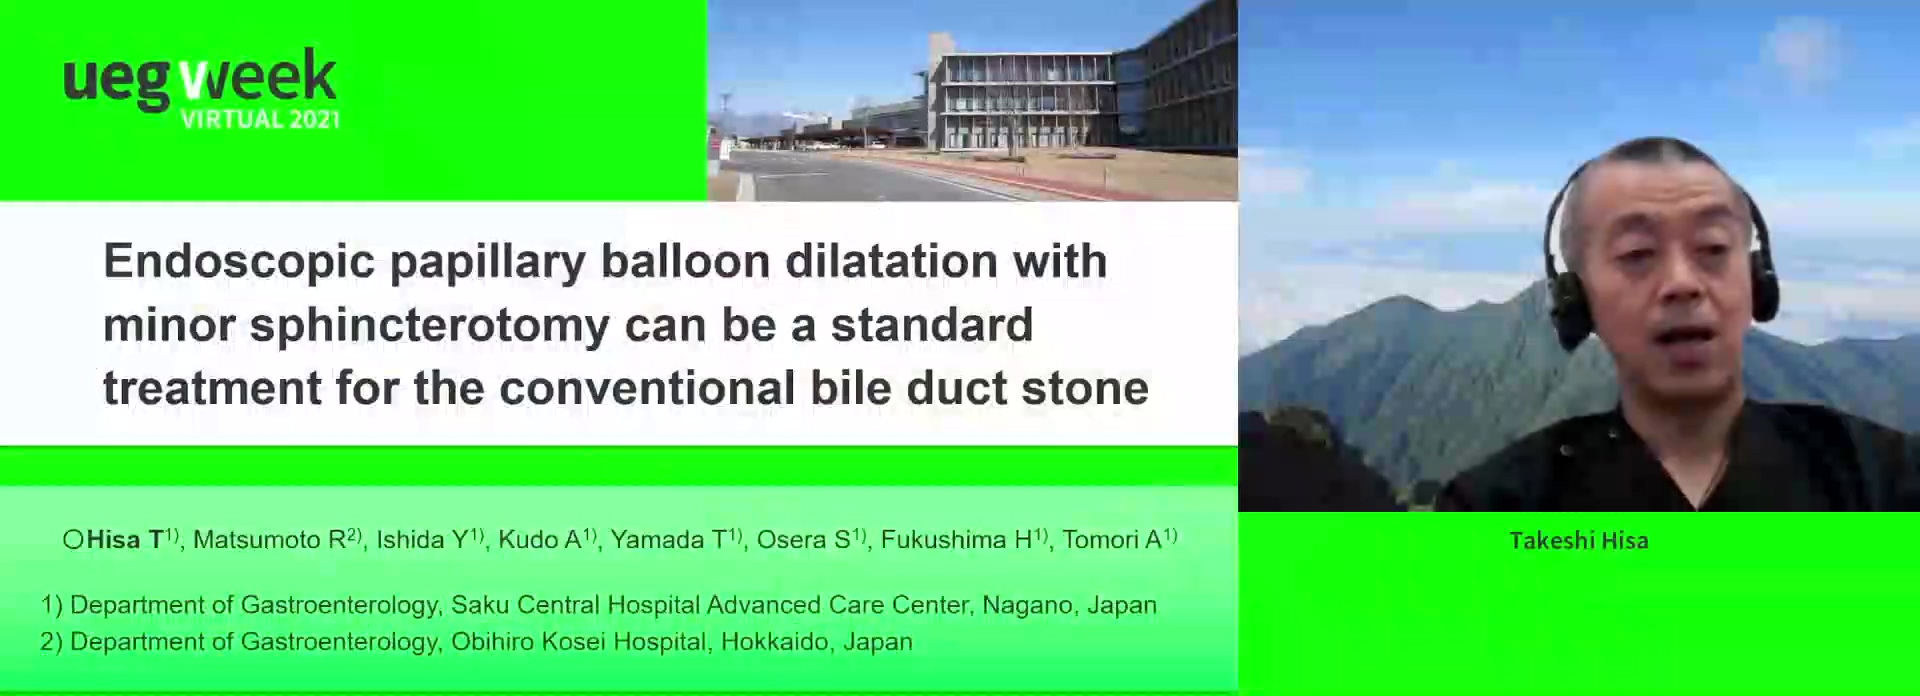 ENDOSCOPIC PAPILLARY BALLOON DILATATION WITH MINOR SPHINCTEROTOMY CAN BE A STANDARD TREATMENT FOR THE CONVENTIONAL BILE DUCT STONE